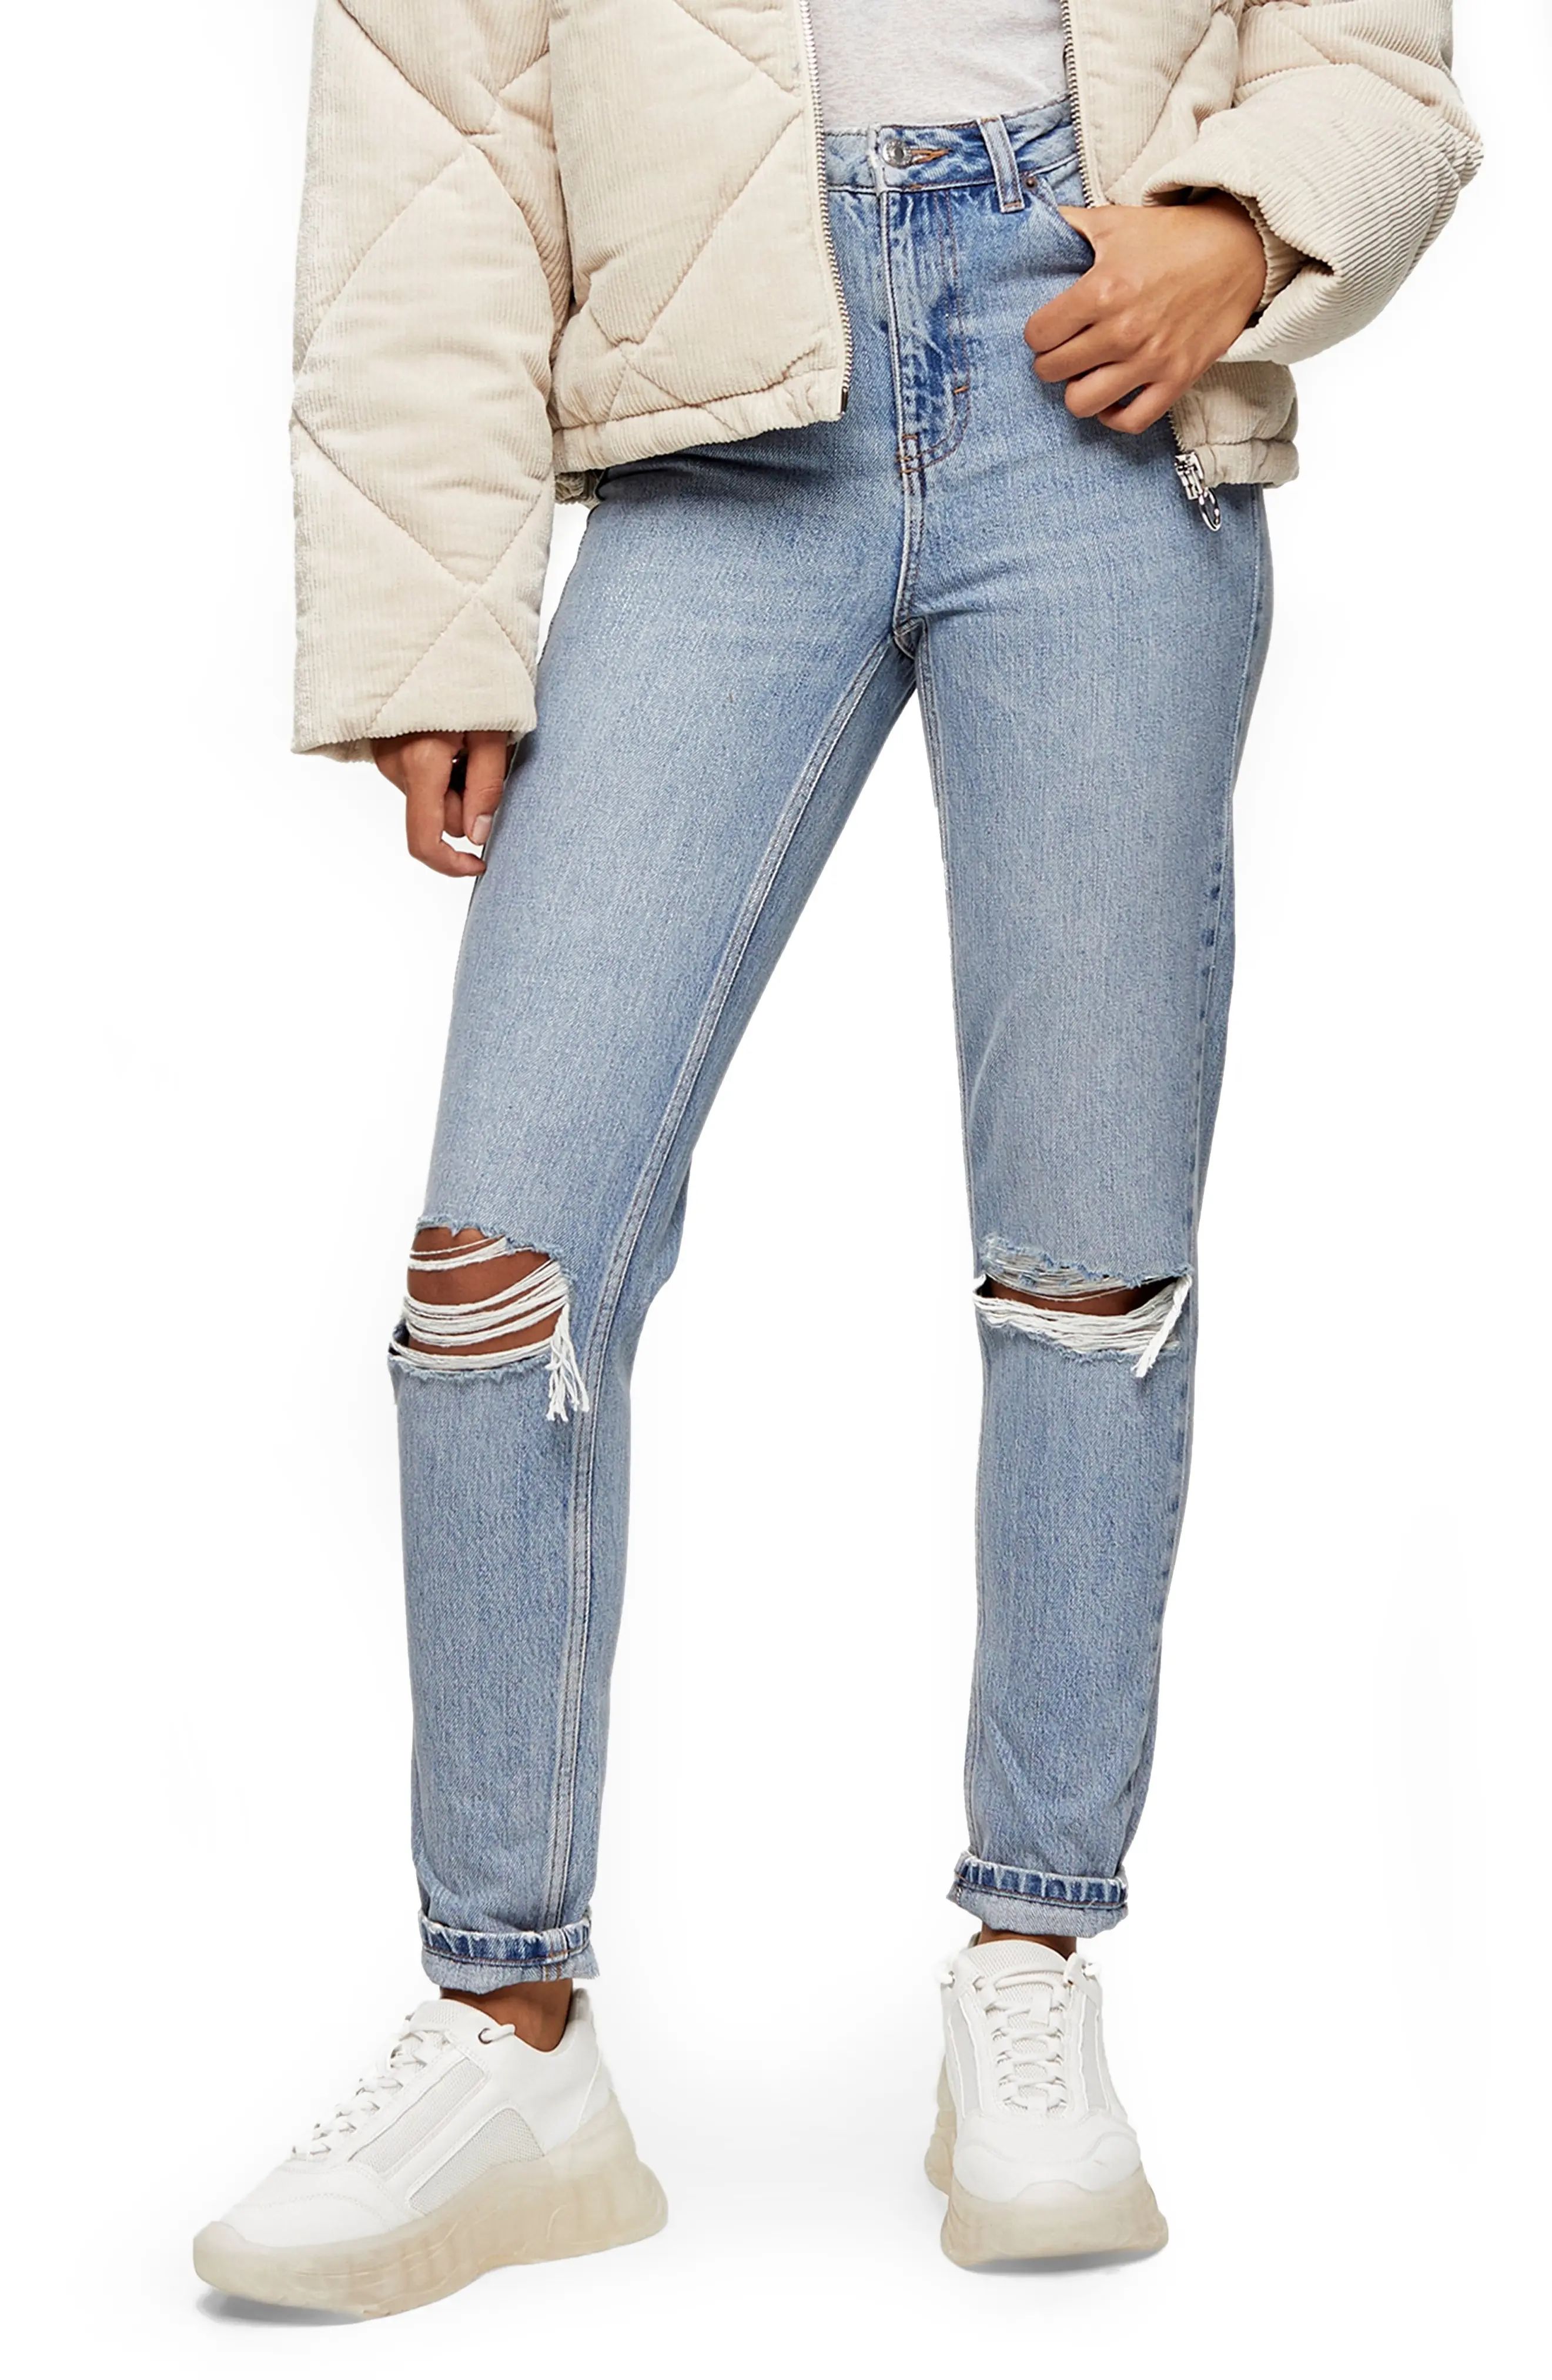 Petite Women's Topshop Double Ripped Mom Jeans, Size 30W x 28L (fits like 28-29W) - Blue | Nordstrom